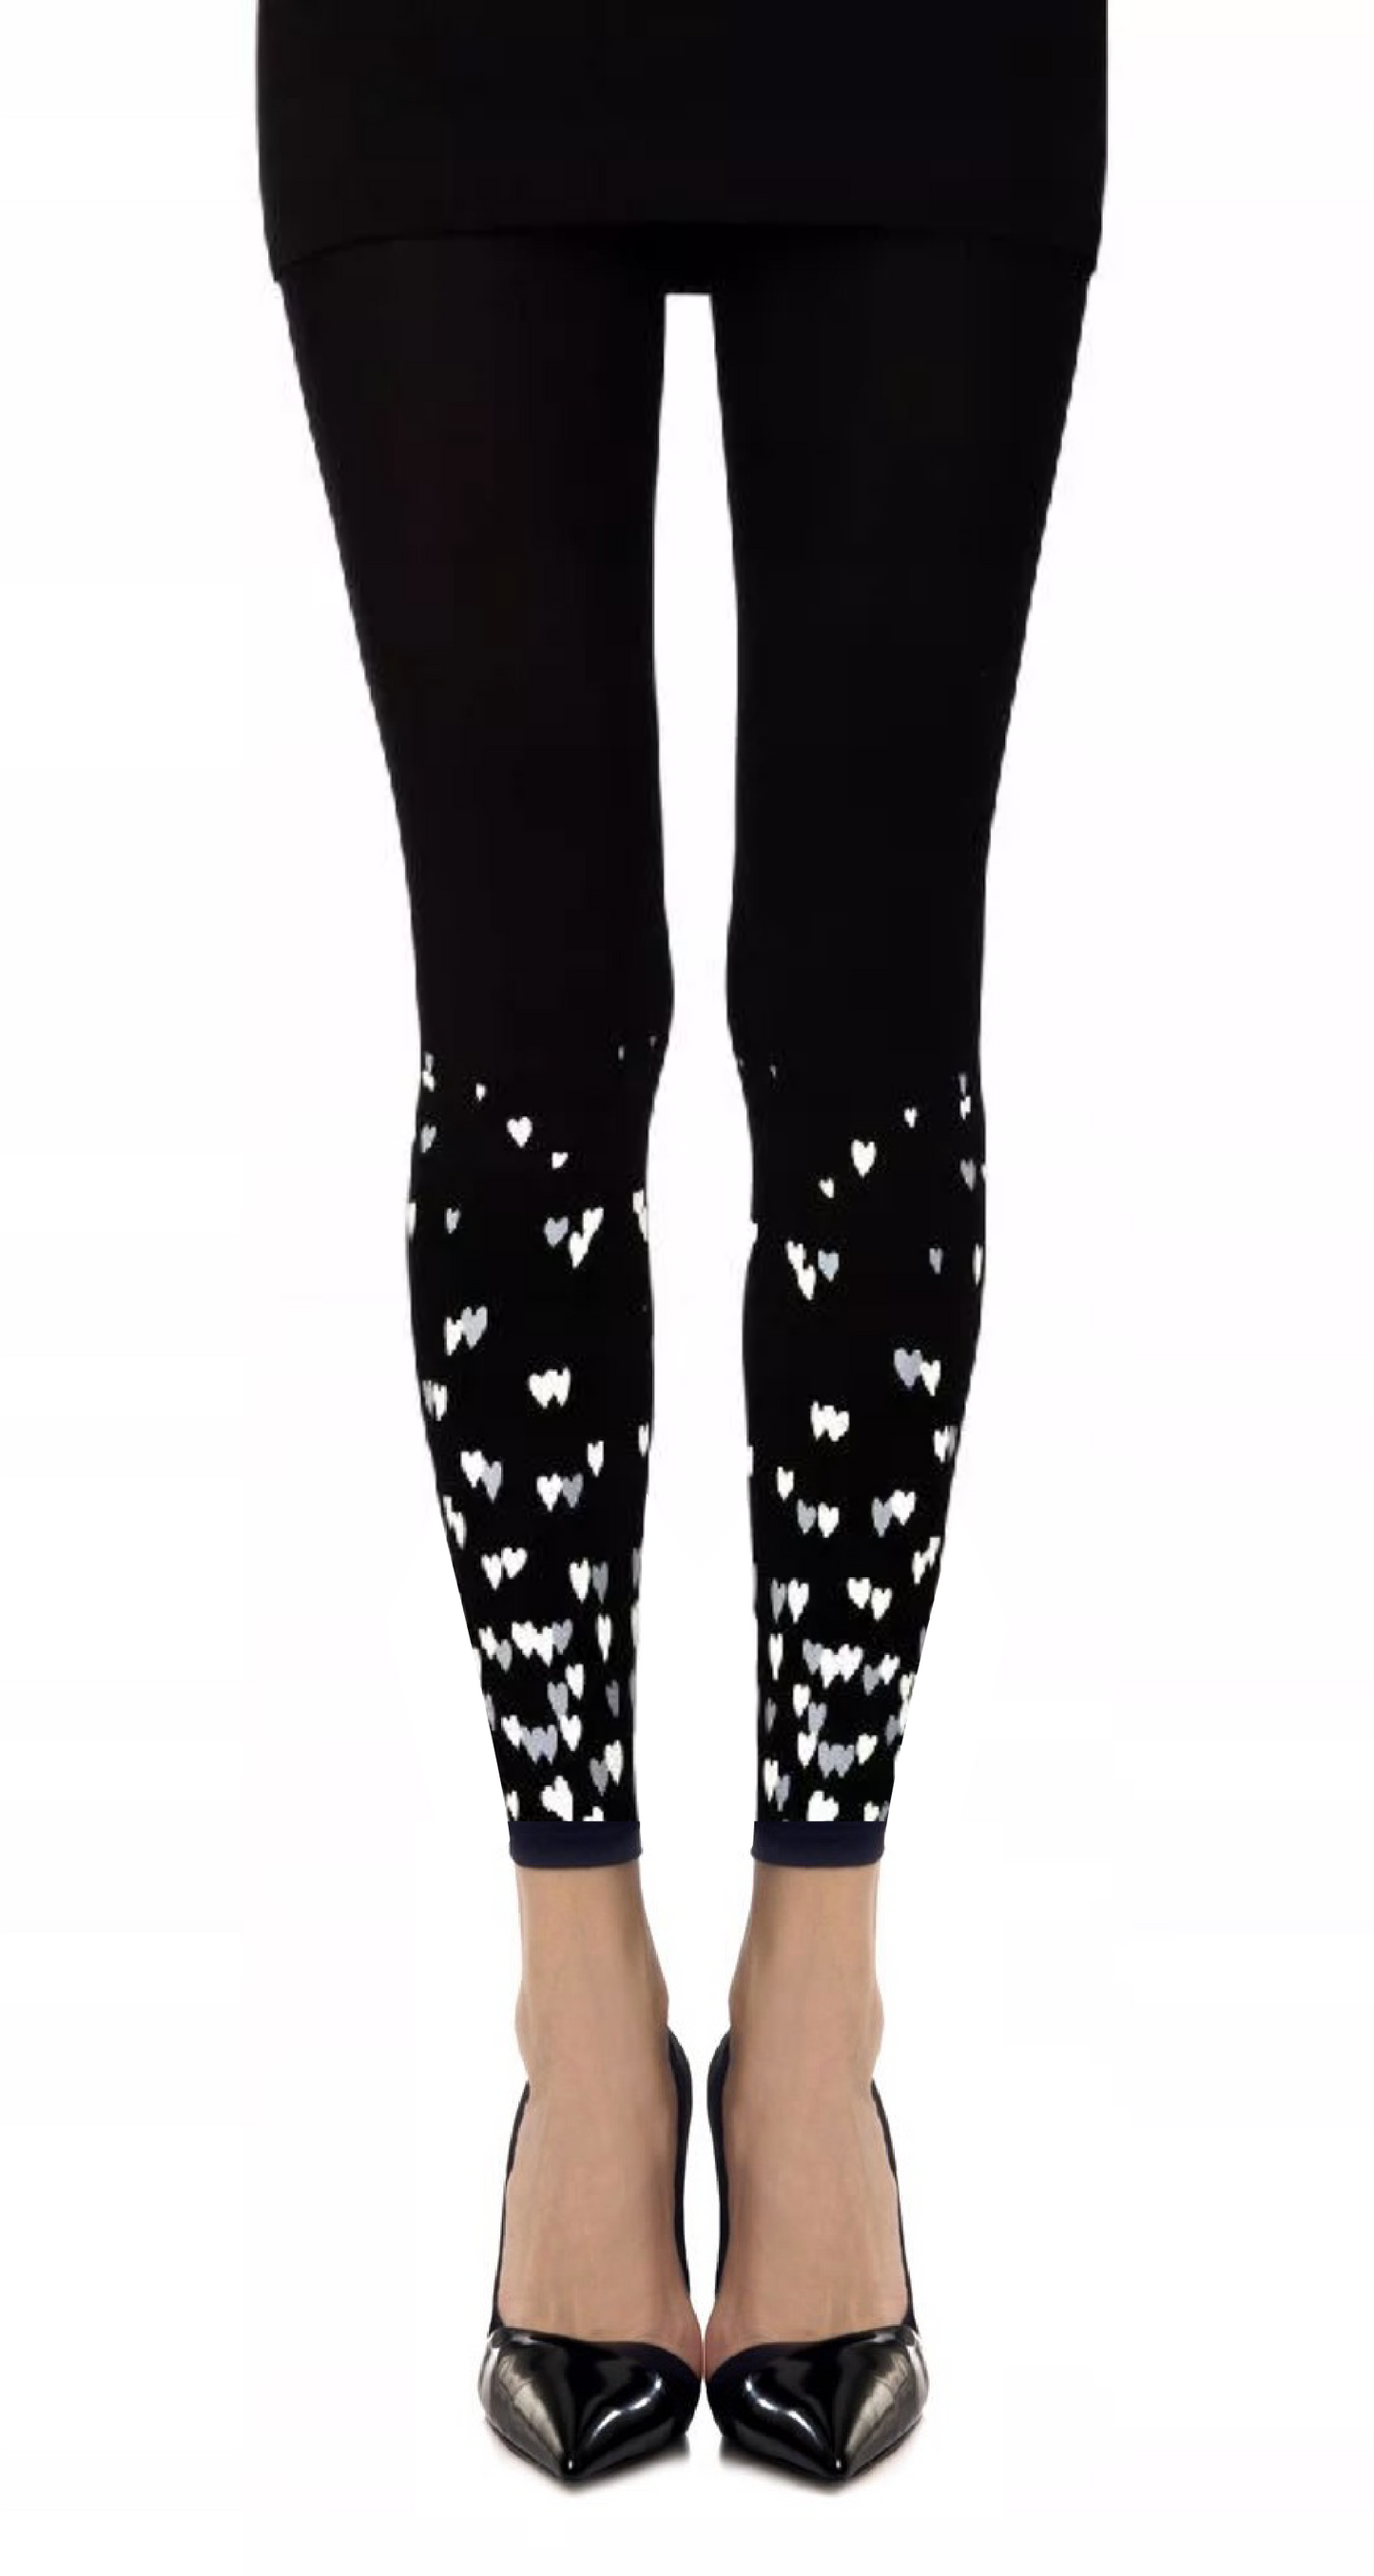 Zohara C286-BGC Queen Of Hearts Footless Tights - Black opaque fashion footless tights with a grey and cream heart pattern print.